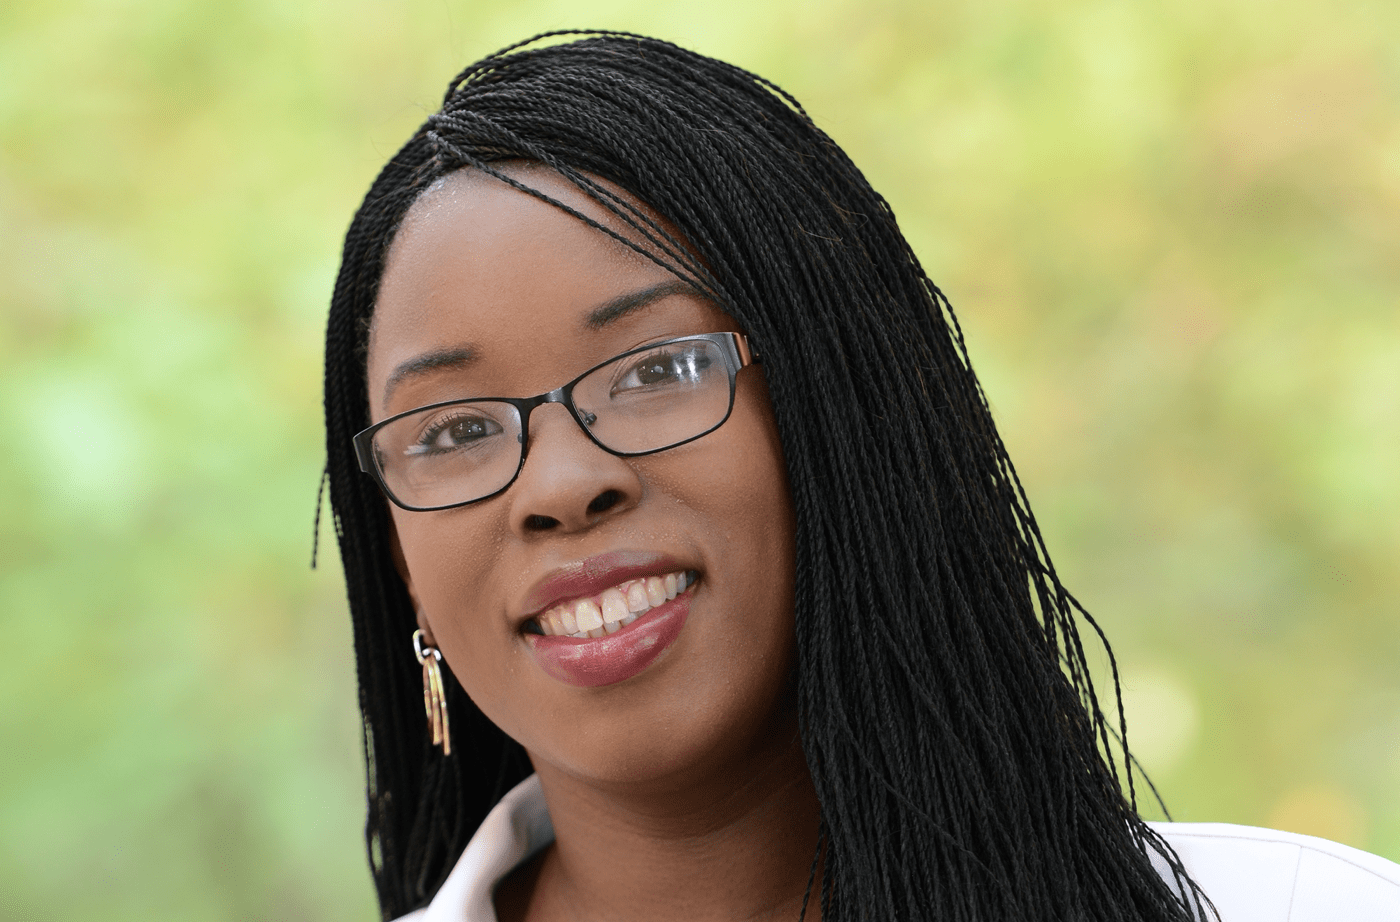 a headshot of a black woman wearing glasses smiling